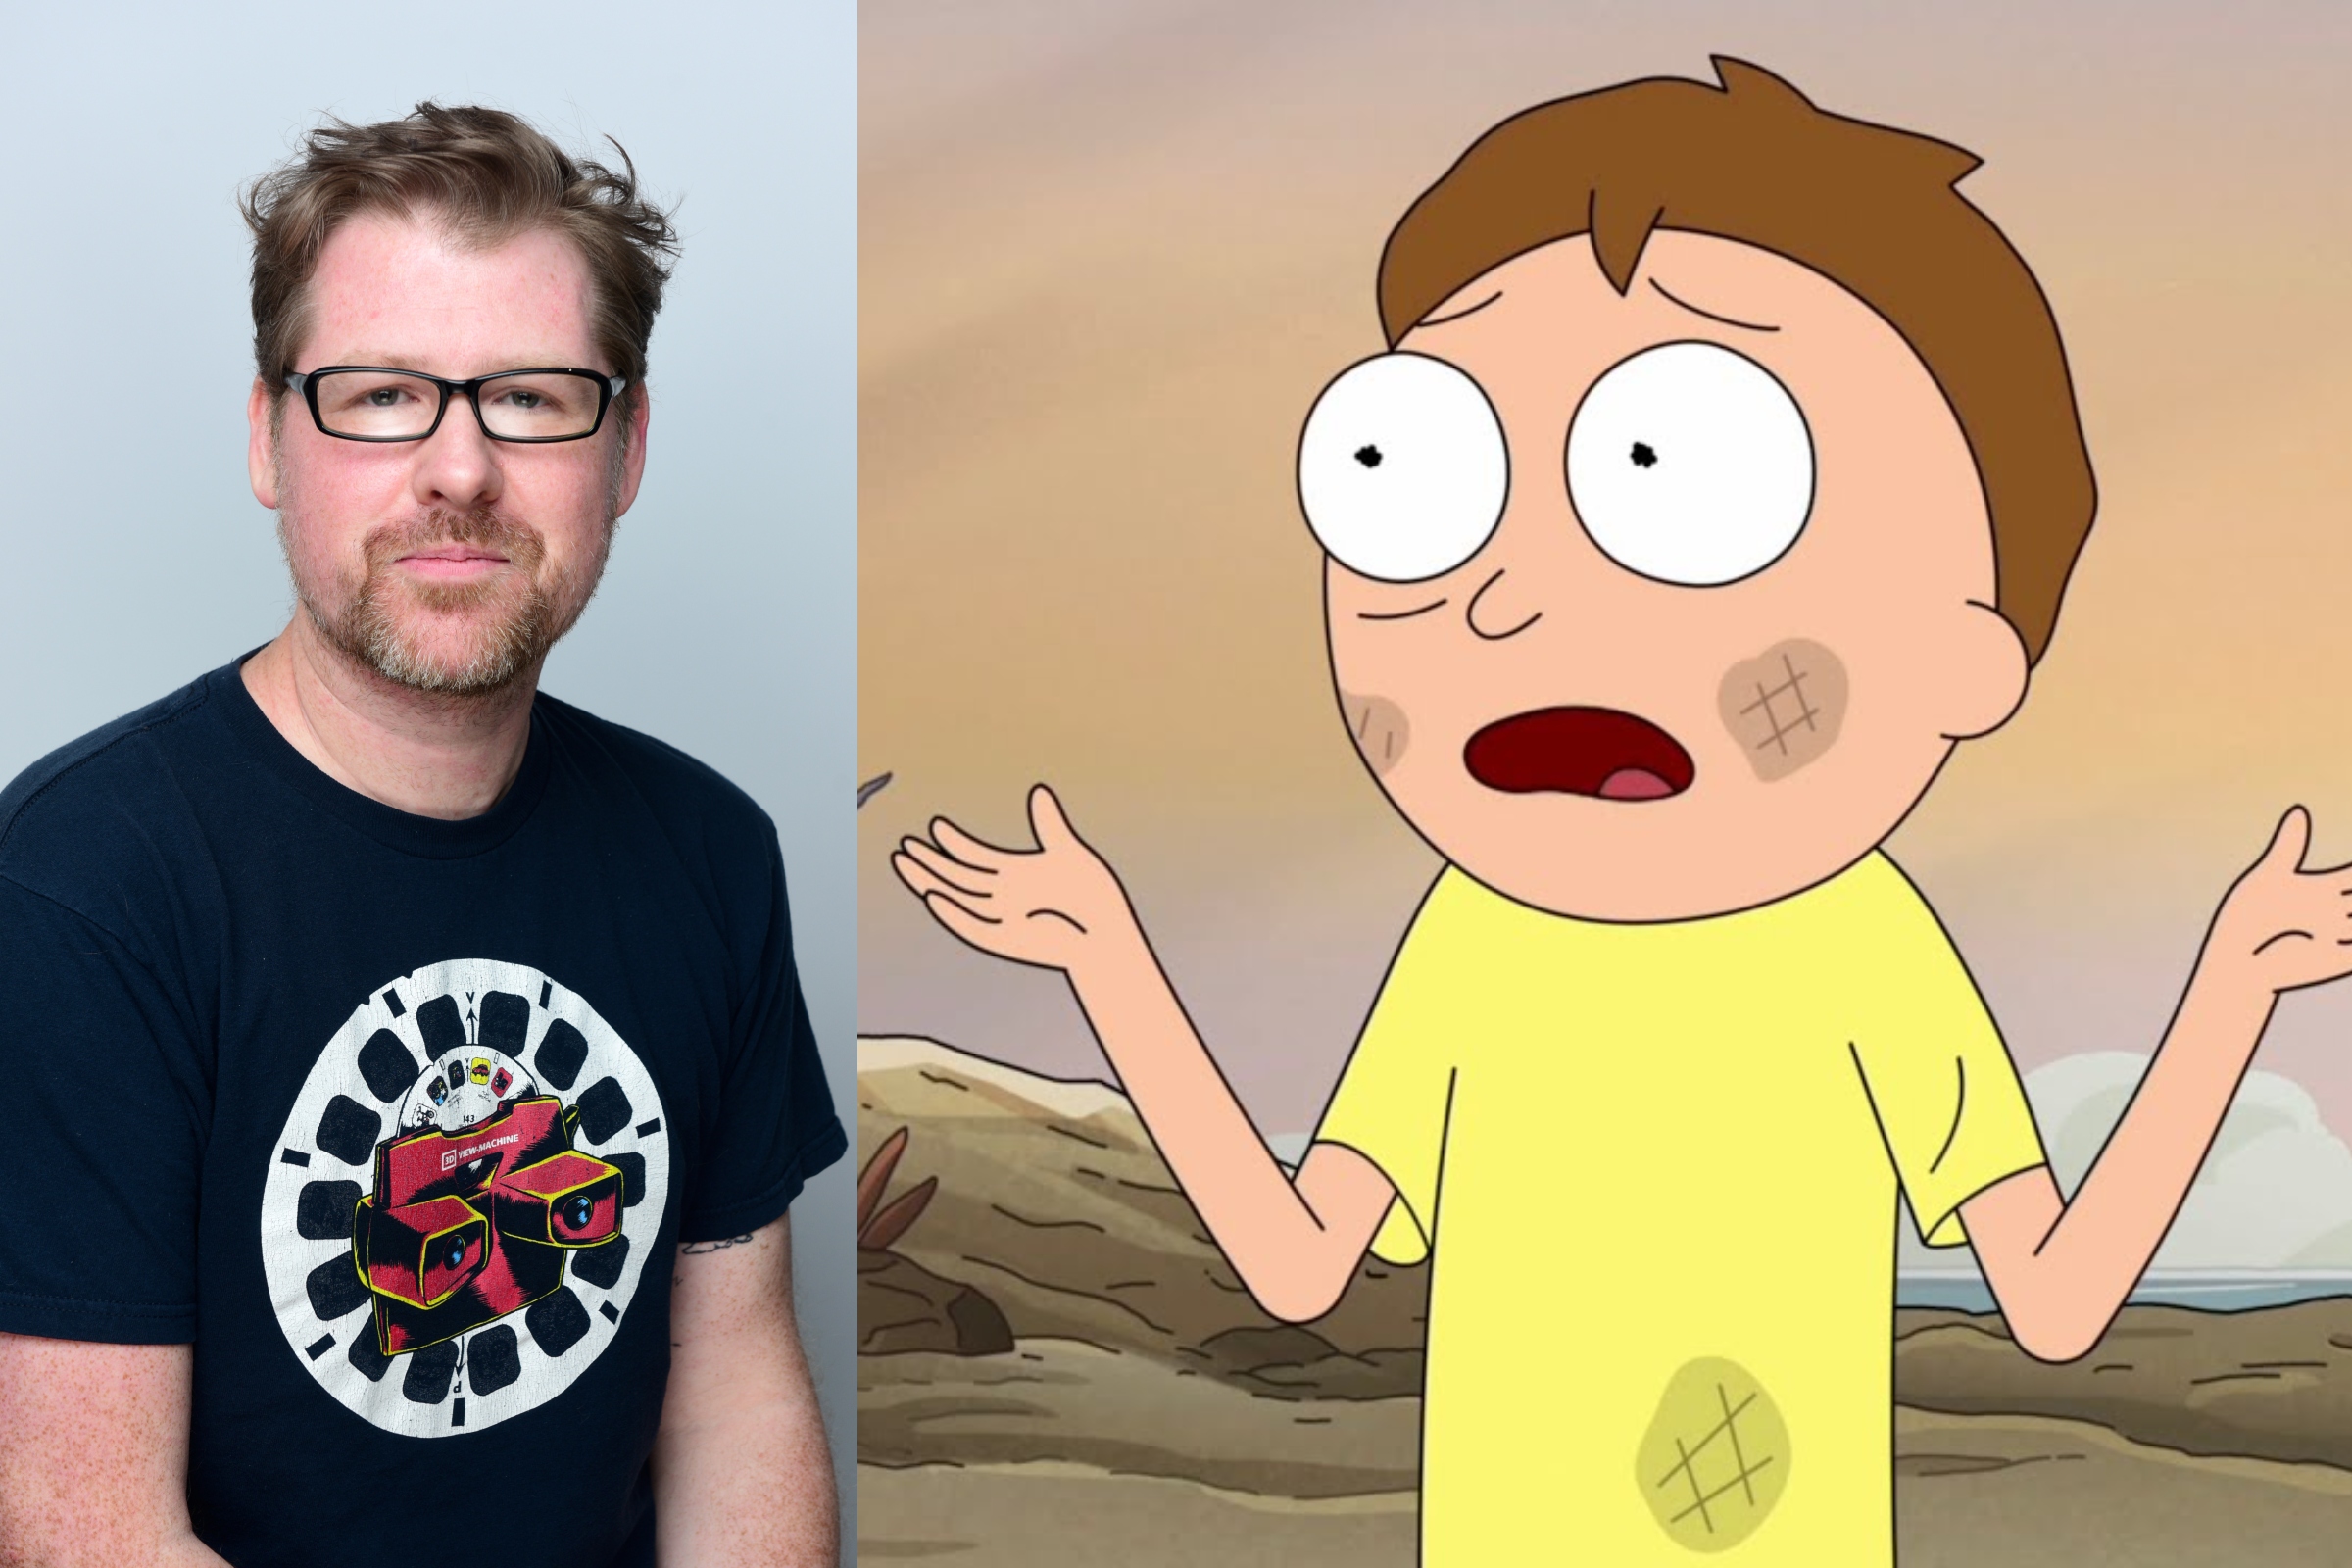 Rick & Morty' Fans Divided After Adult Swim Cuts Ties With Justin Roiland